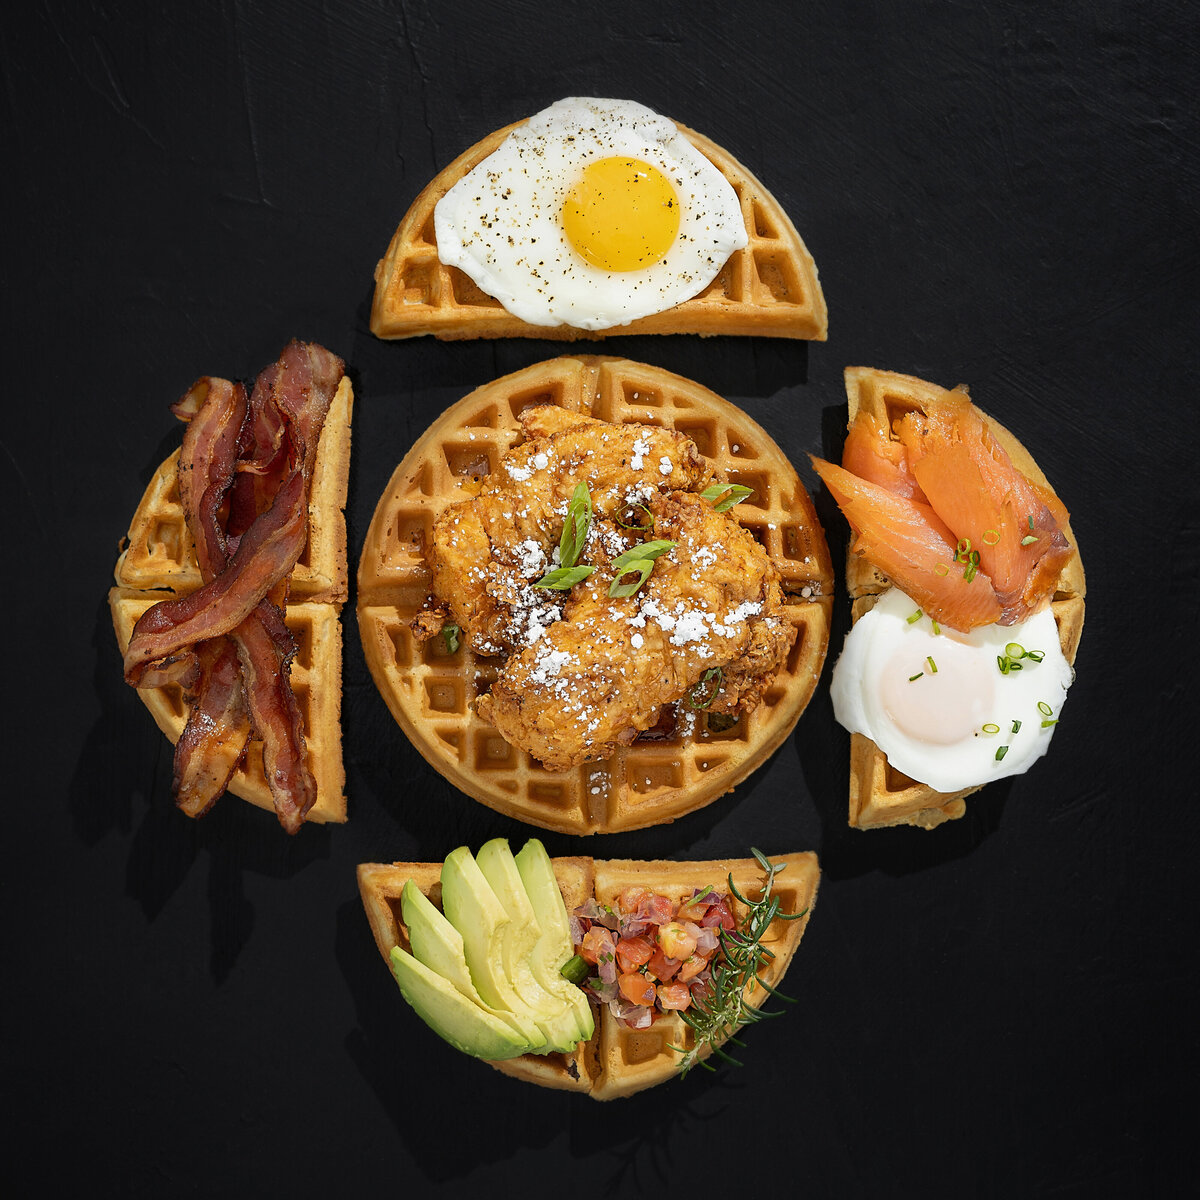 Waffles with various breakfast toppings